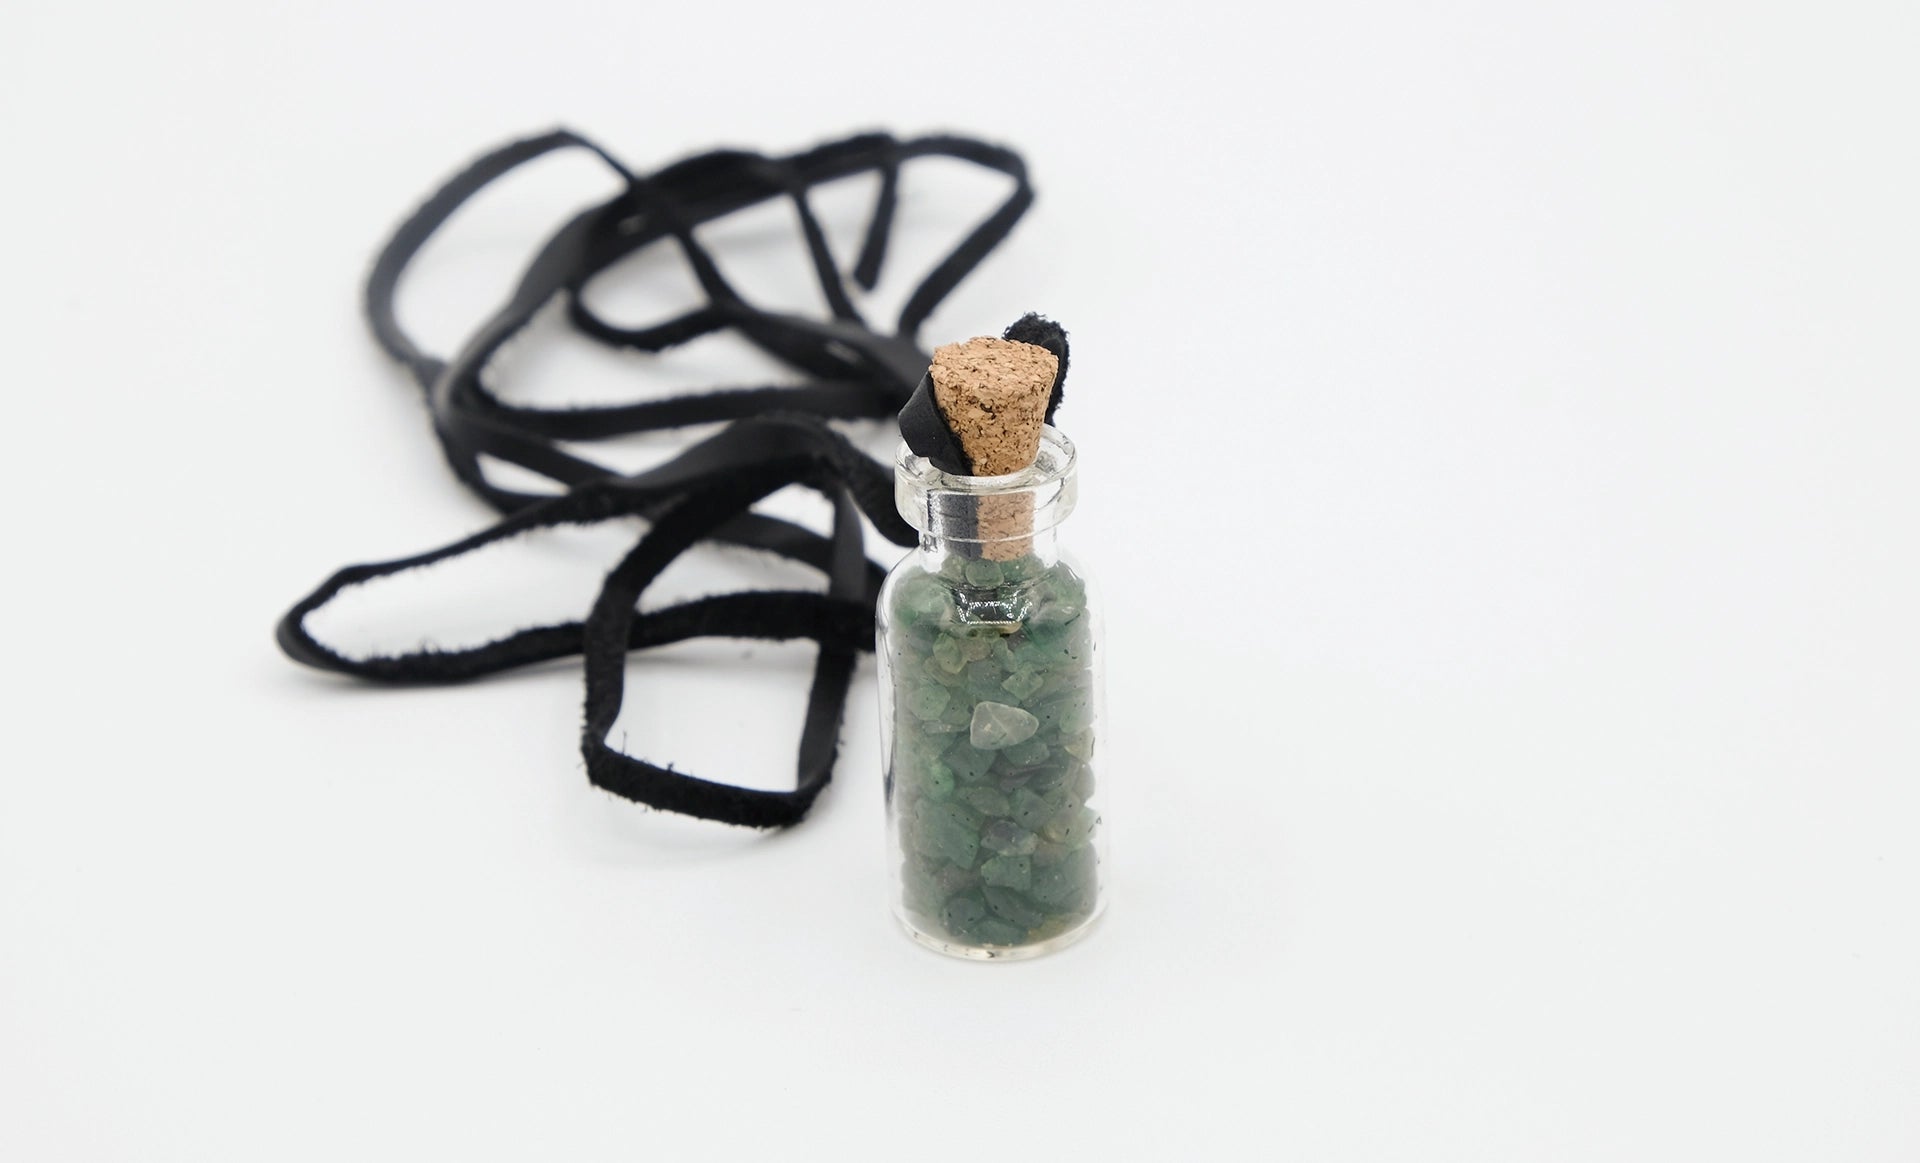 pendant made with a little glass bottle filled with aventurine shards